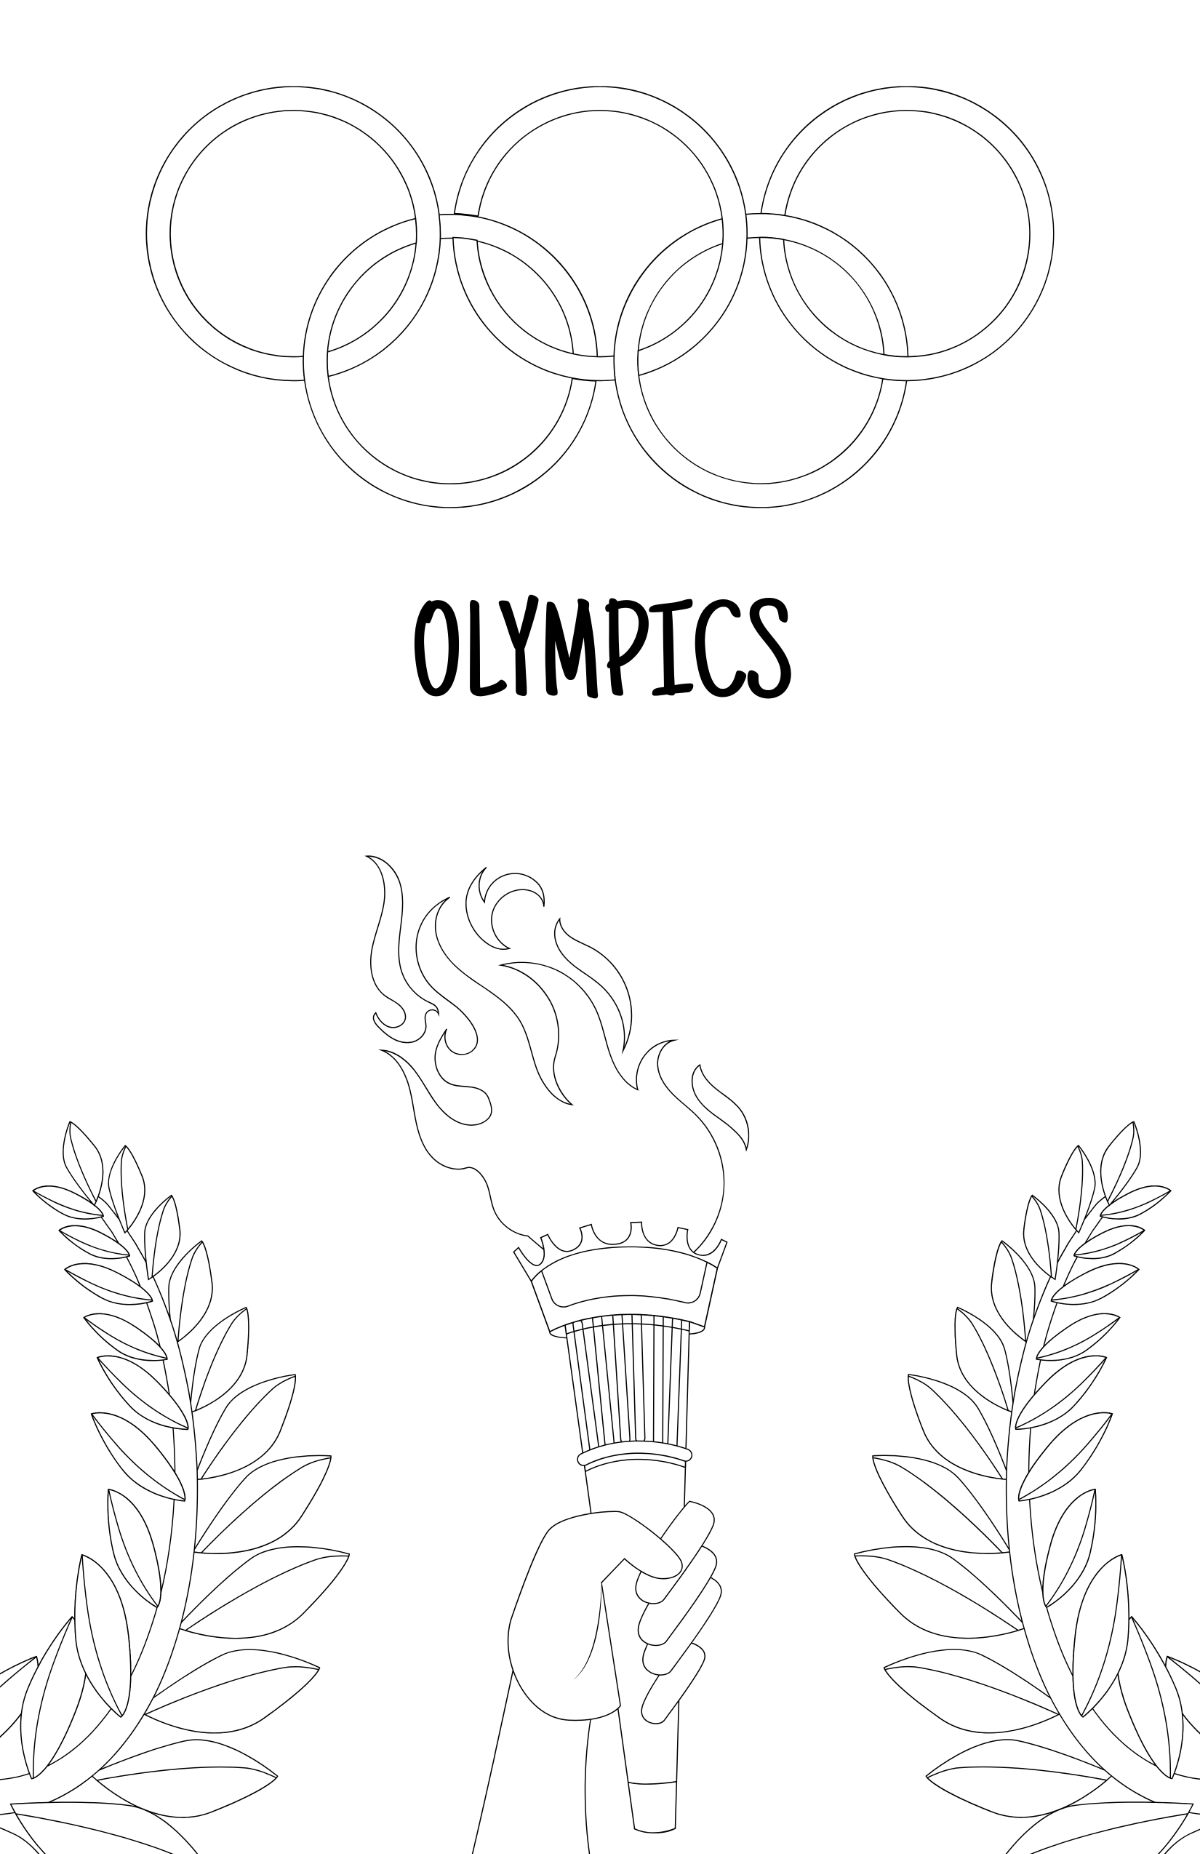 Olympics Poster Drawing